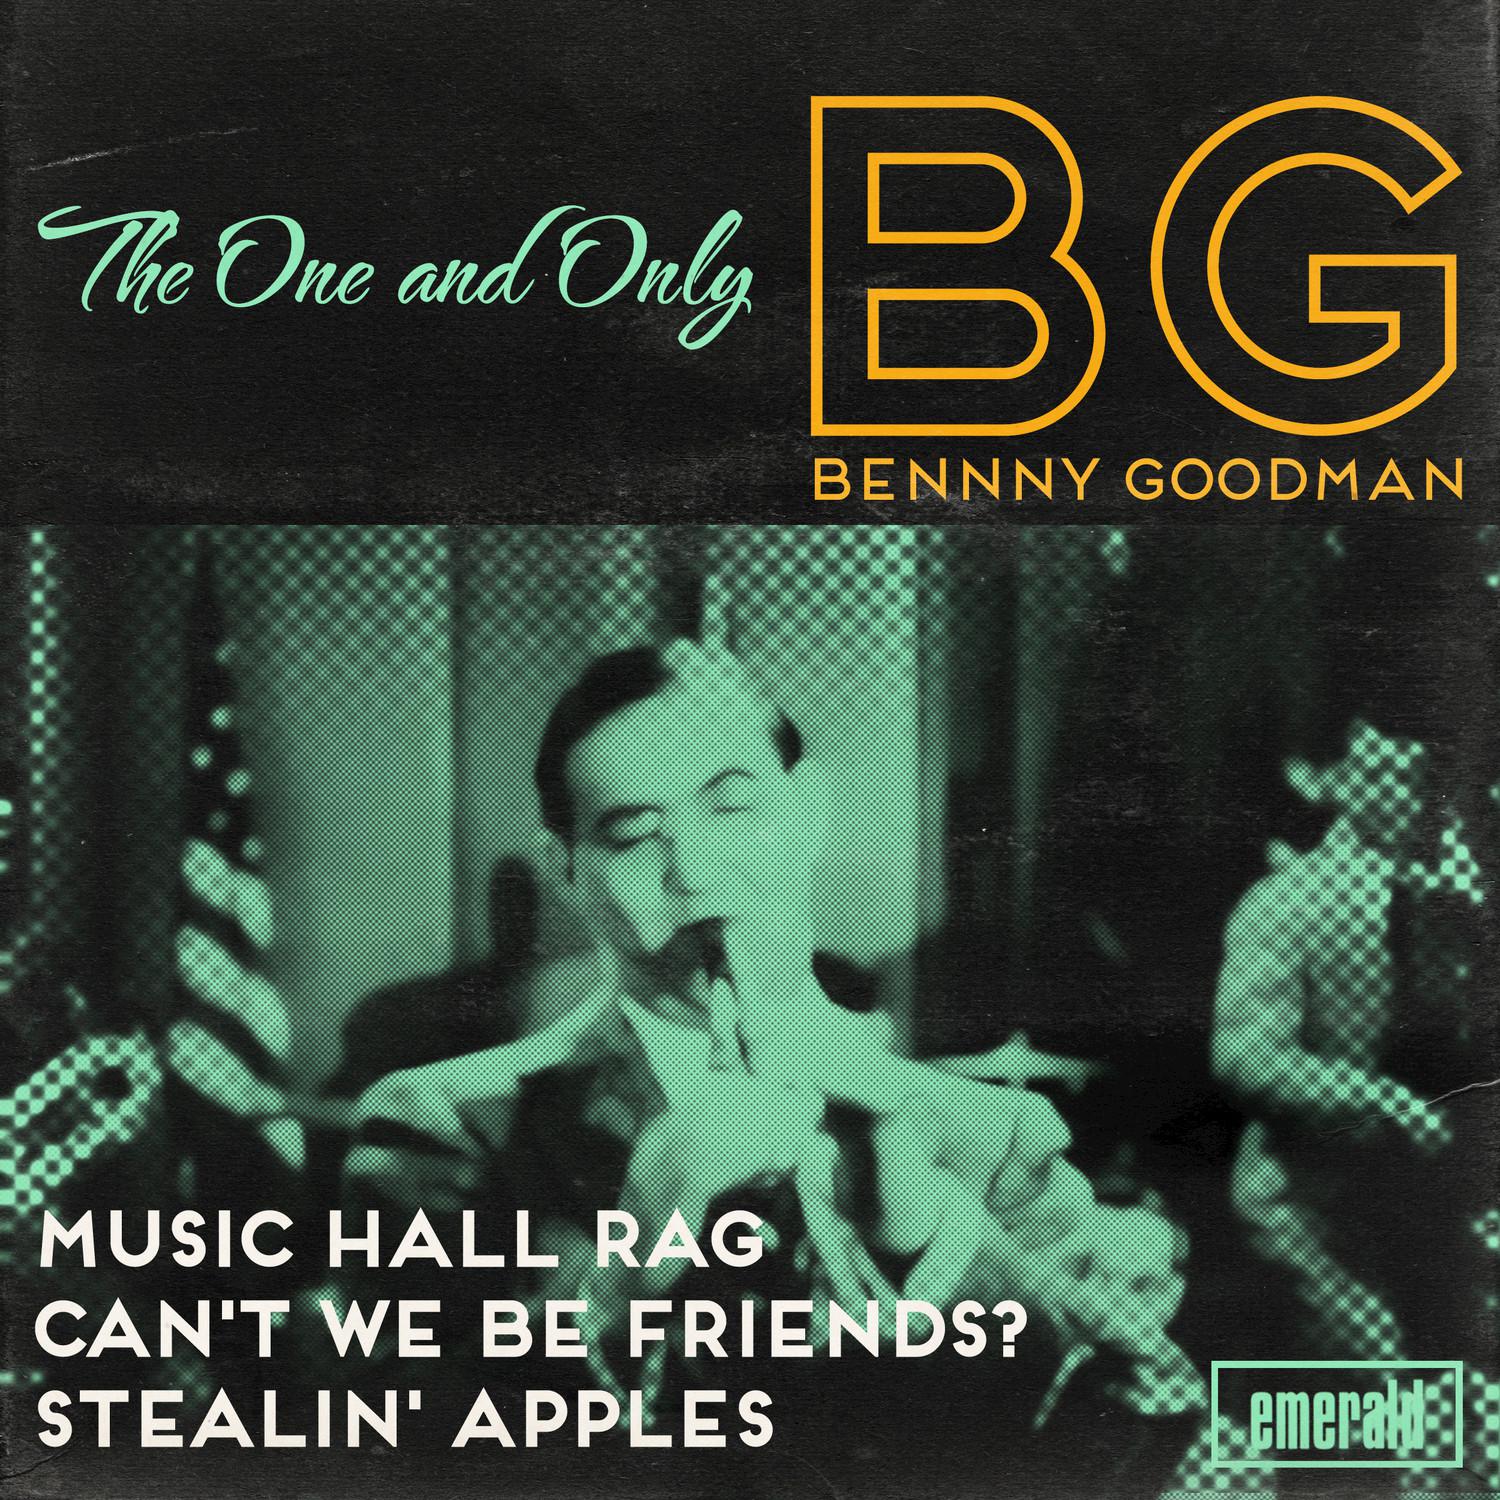 The One and Only Benny Goodman